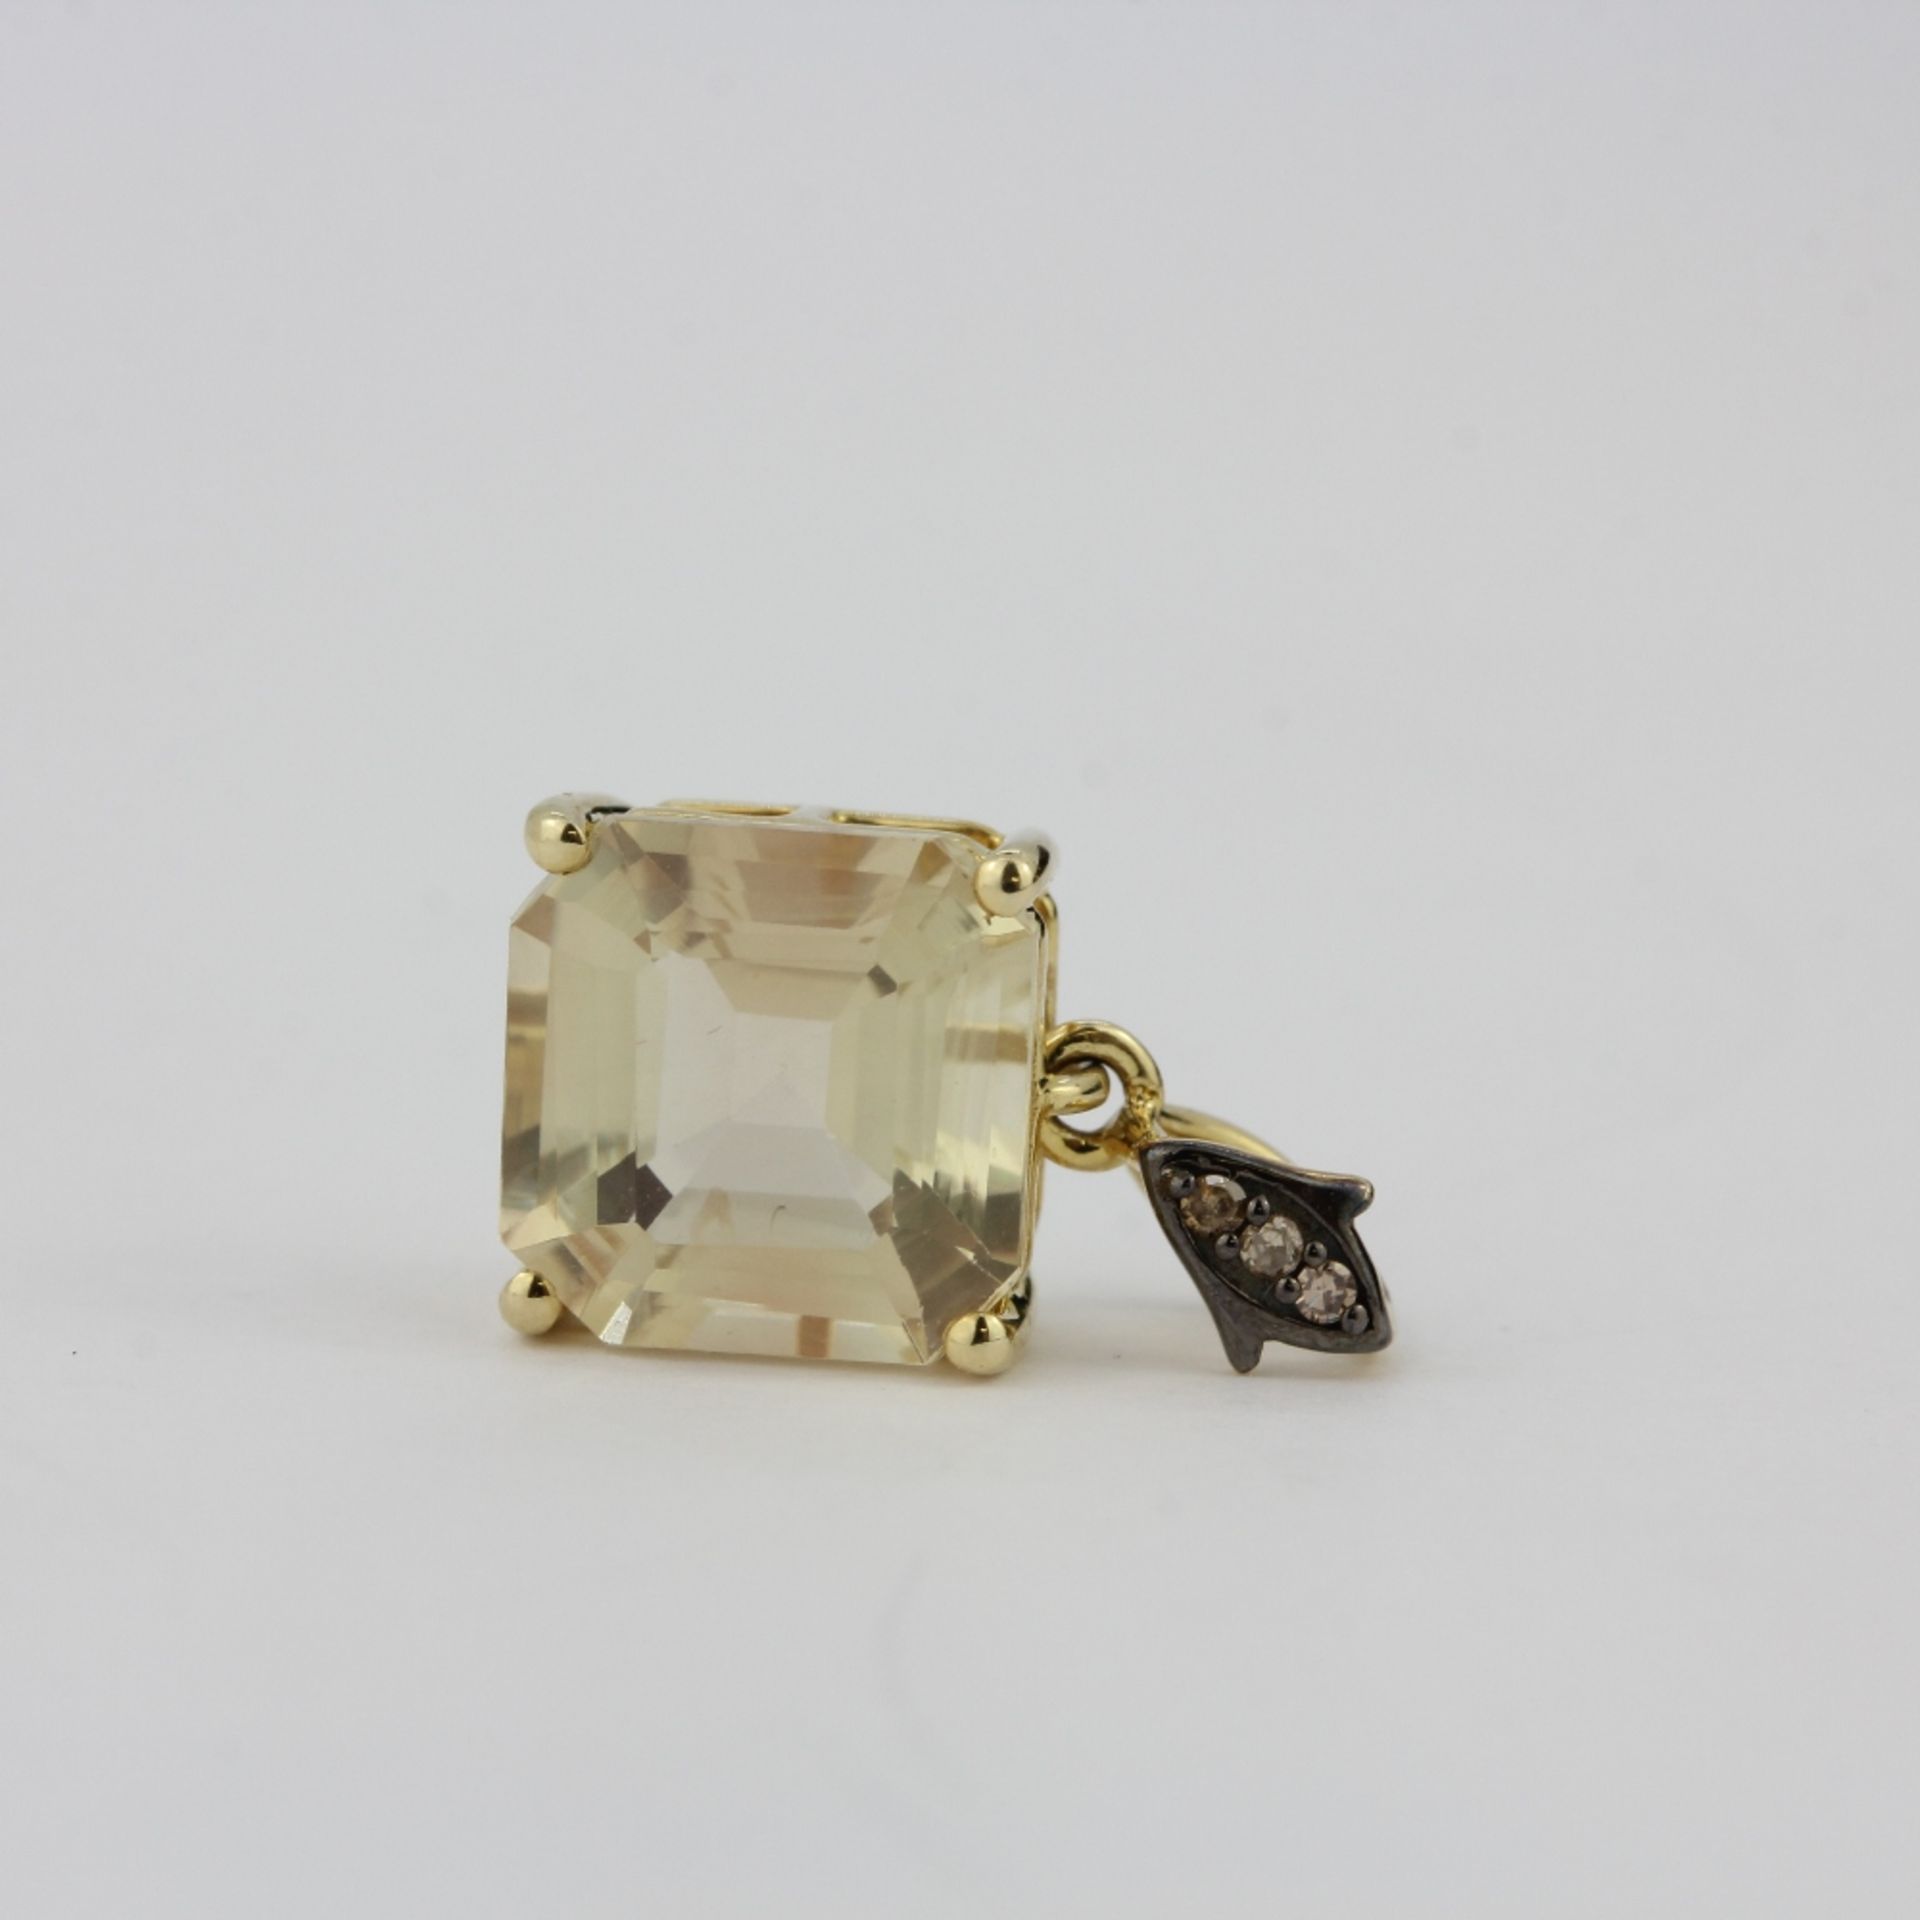 A 10ct yellow gold (stamped 10K) pendant set with an emerald cut lemon quartz and diamonds, L. 1. - Image 2 of 3